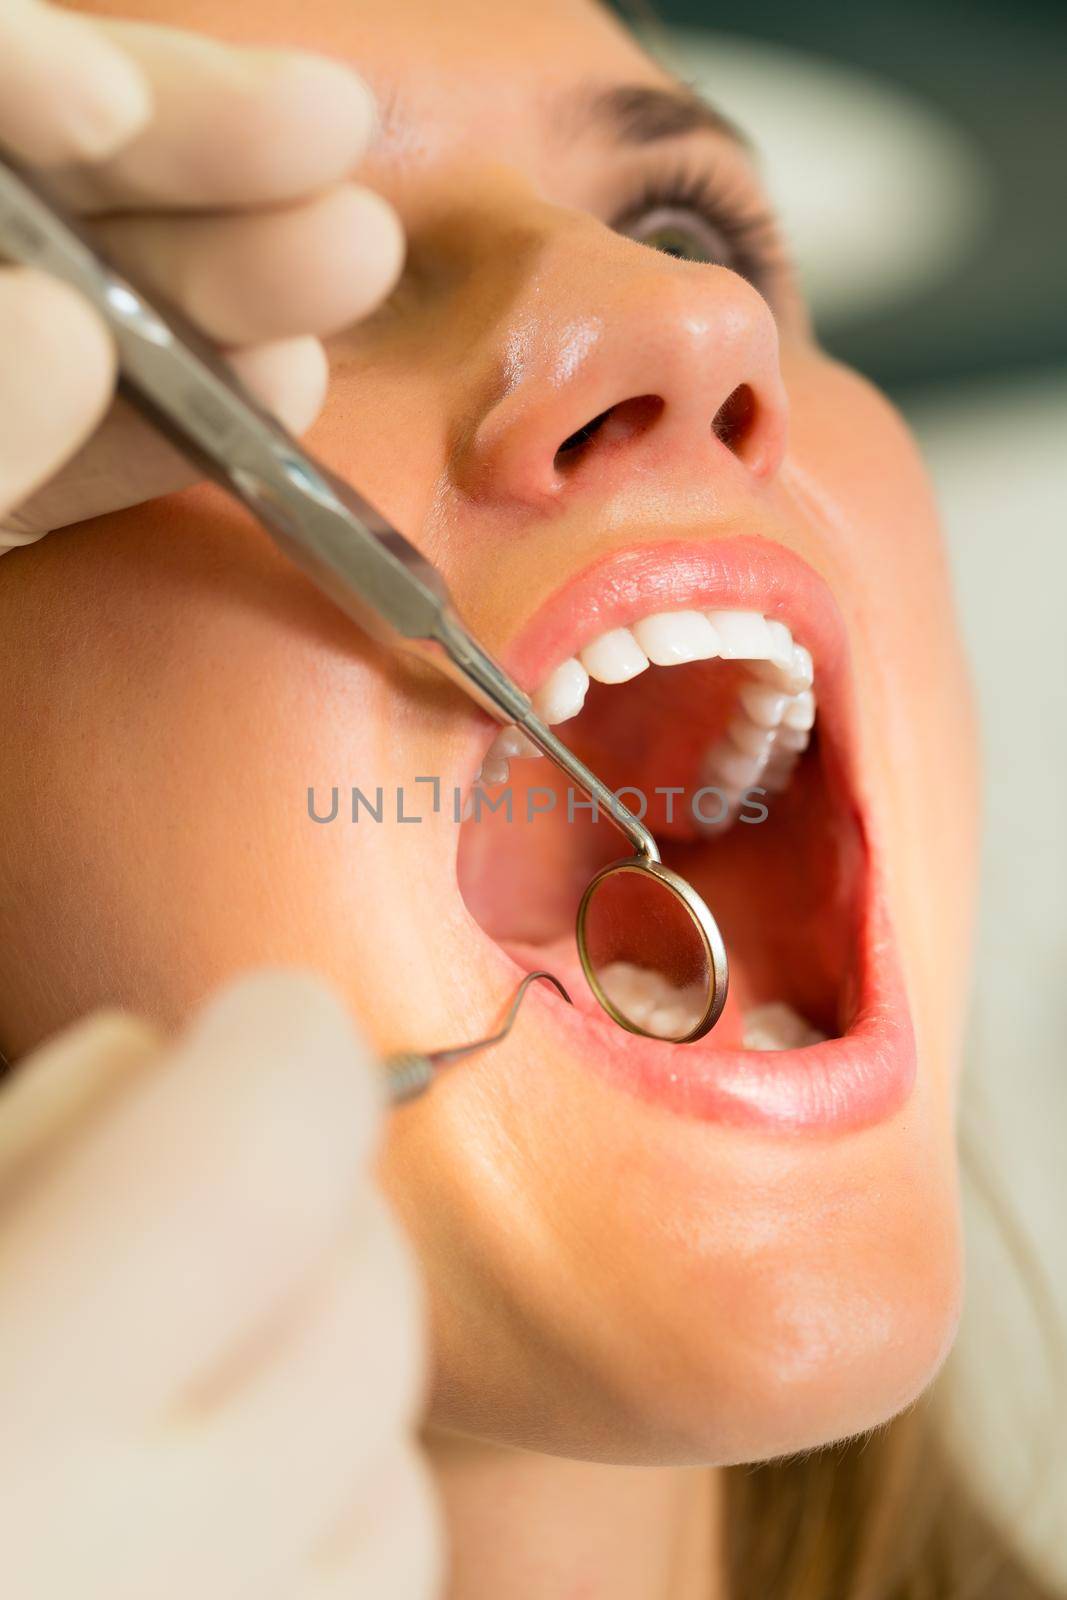 Female patient with dentist in a dental treatment, wearing gloves